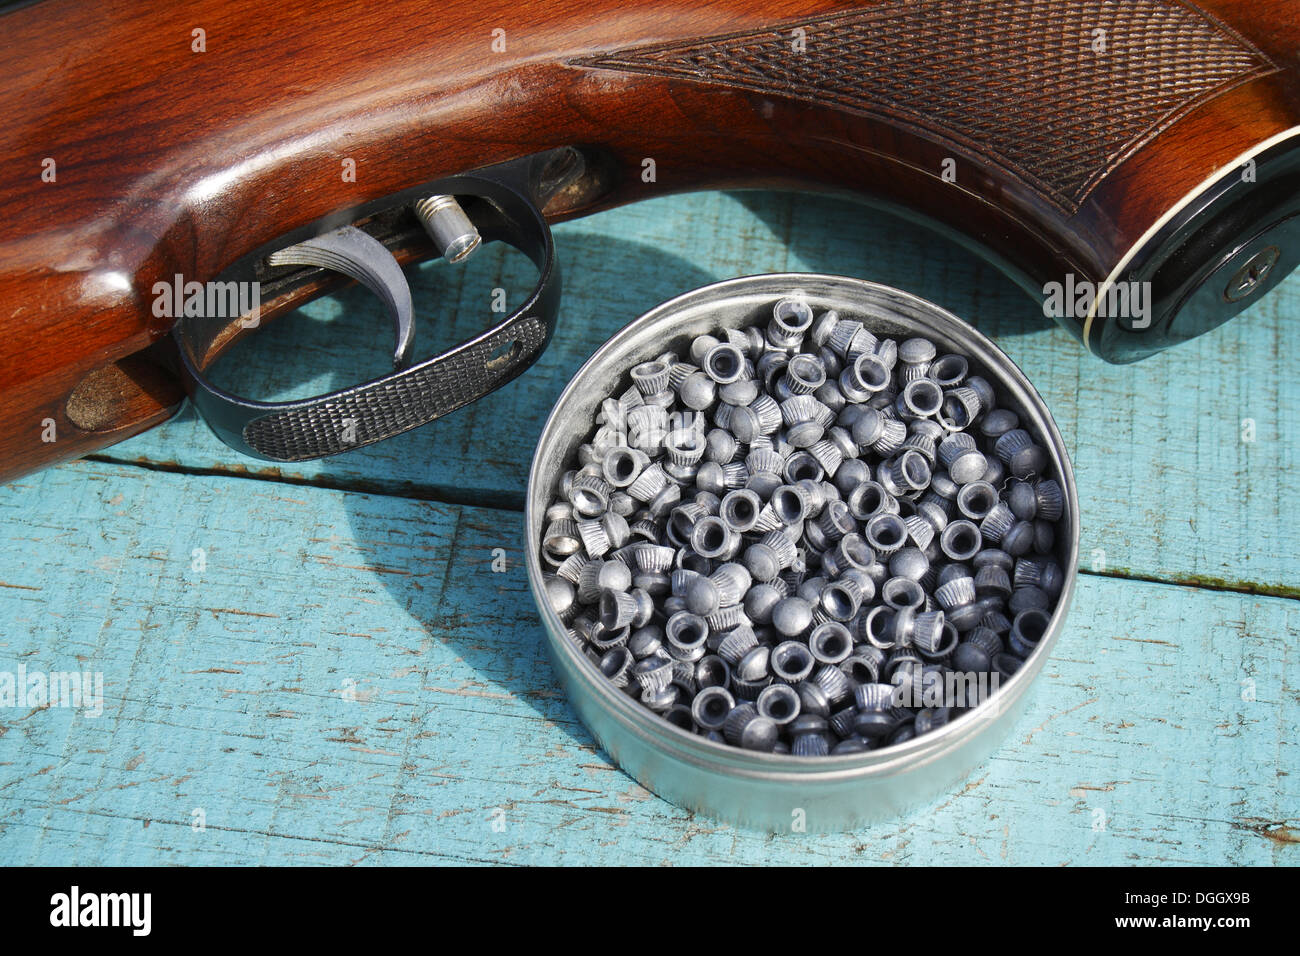 Lead balls and magazine for air rifles Stock Photo - Alamy